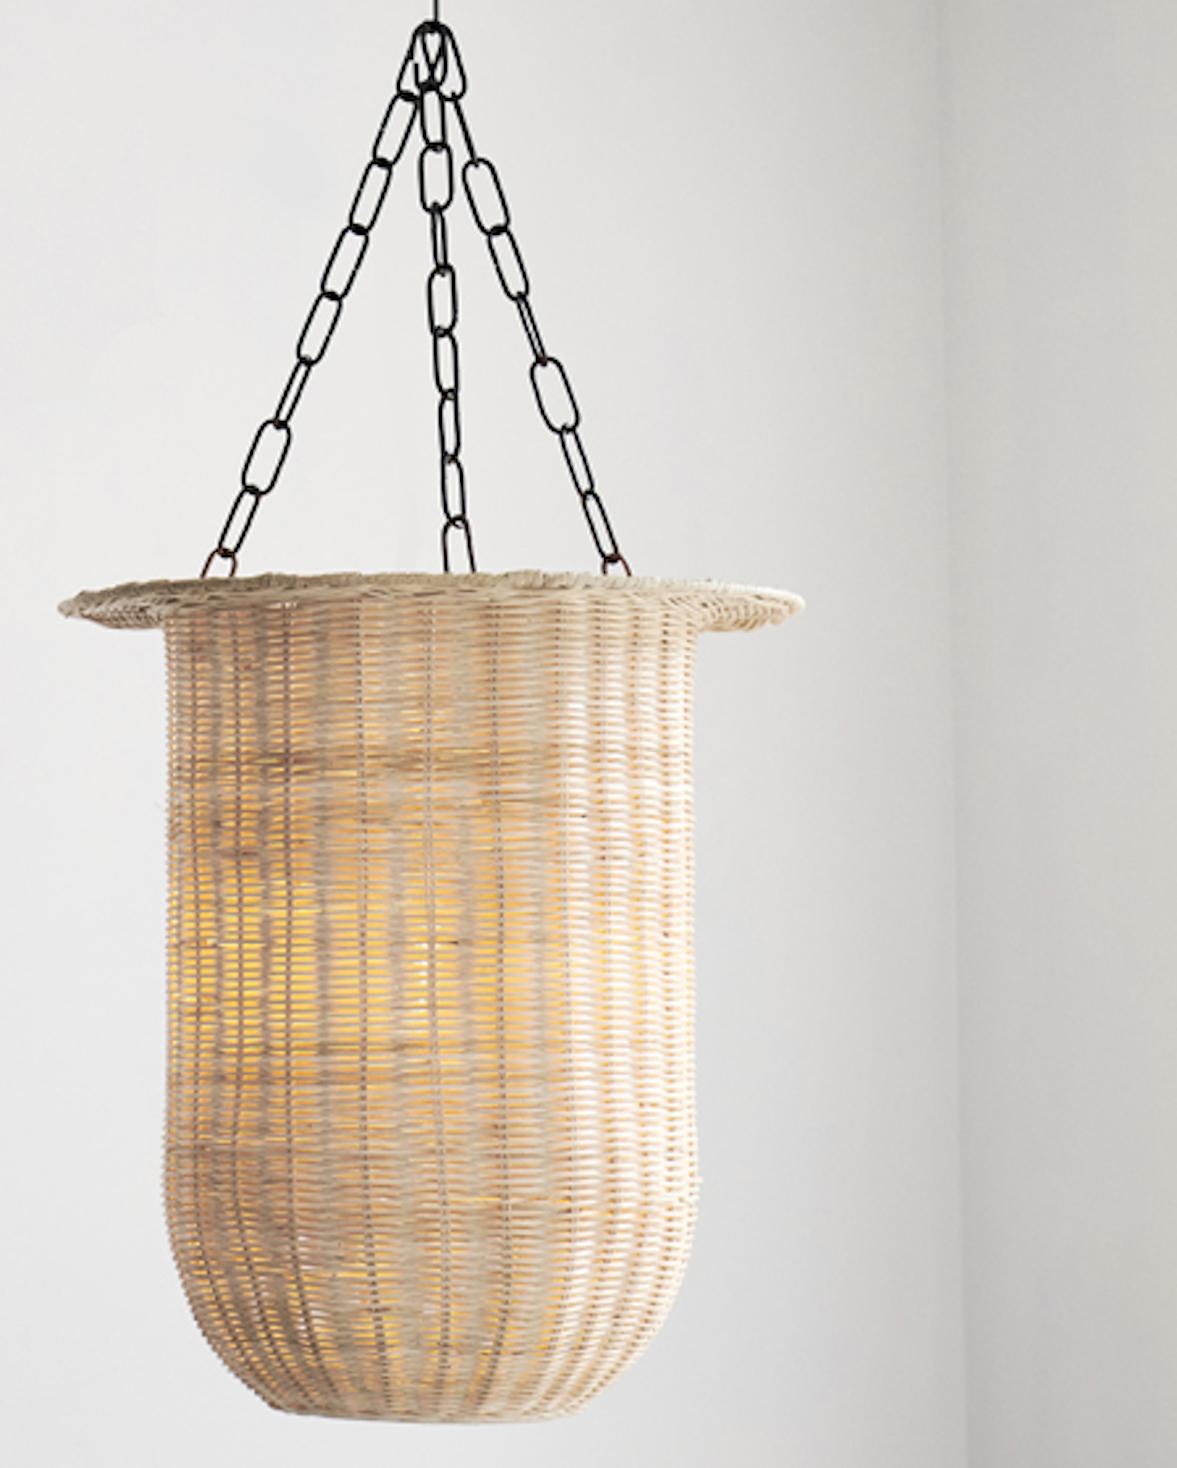 Handwoven Rattan in Indonesia. 
Designed by Dunlin. 

Dunlin's exquisitely crafted Hurricane Lantern Pendant - a stunning addition to any interior space. This pendant boasts elegant, perfectly proportioned lines that are accentuated by its unique